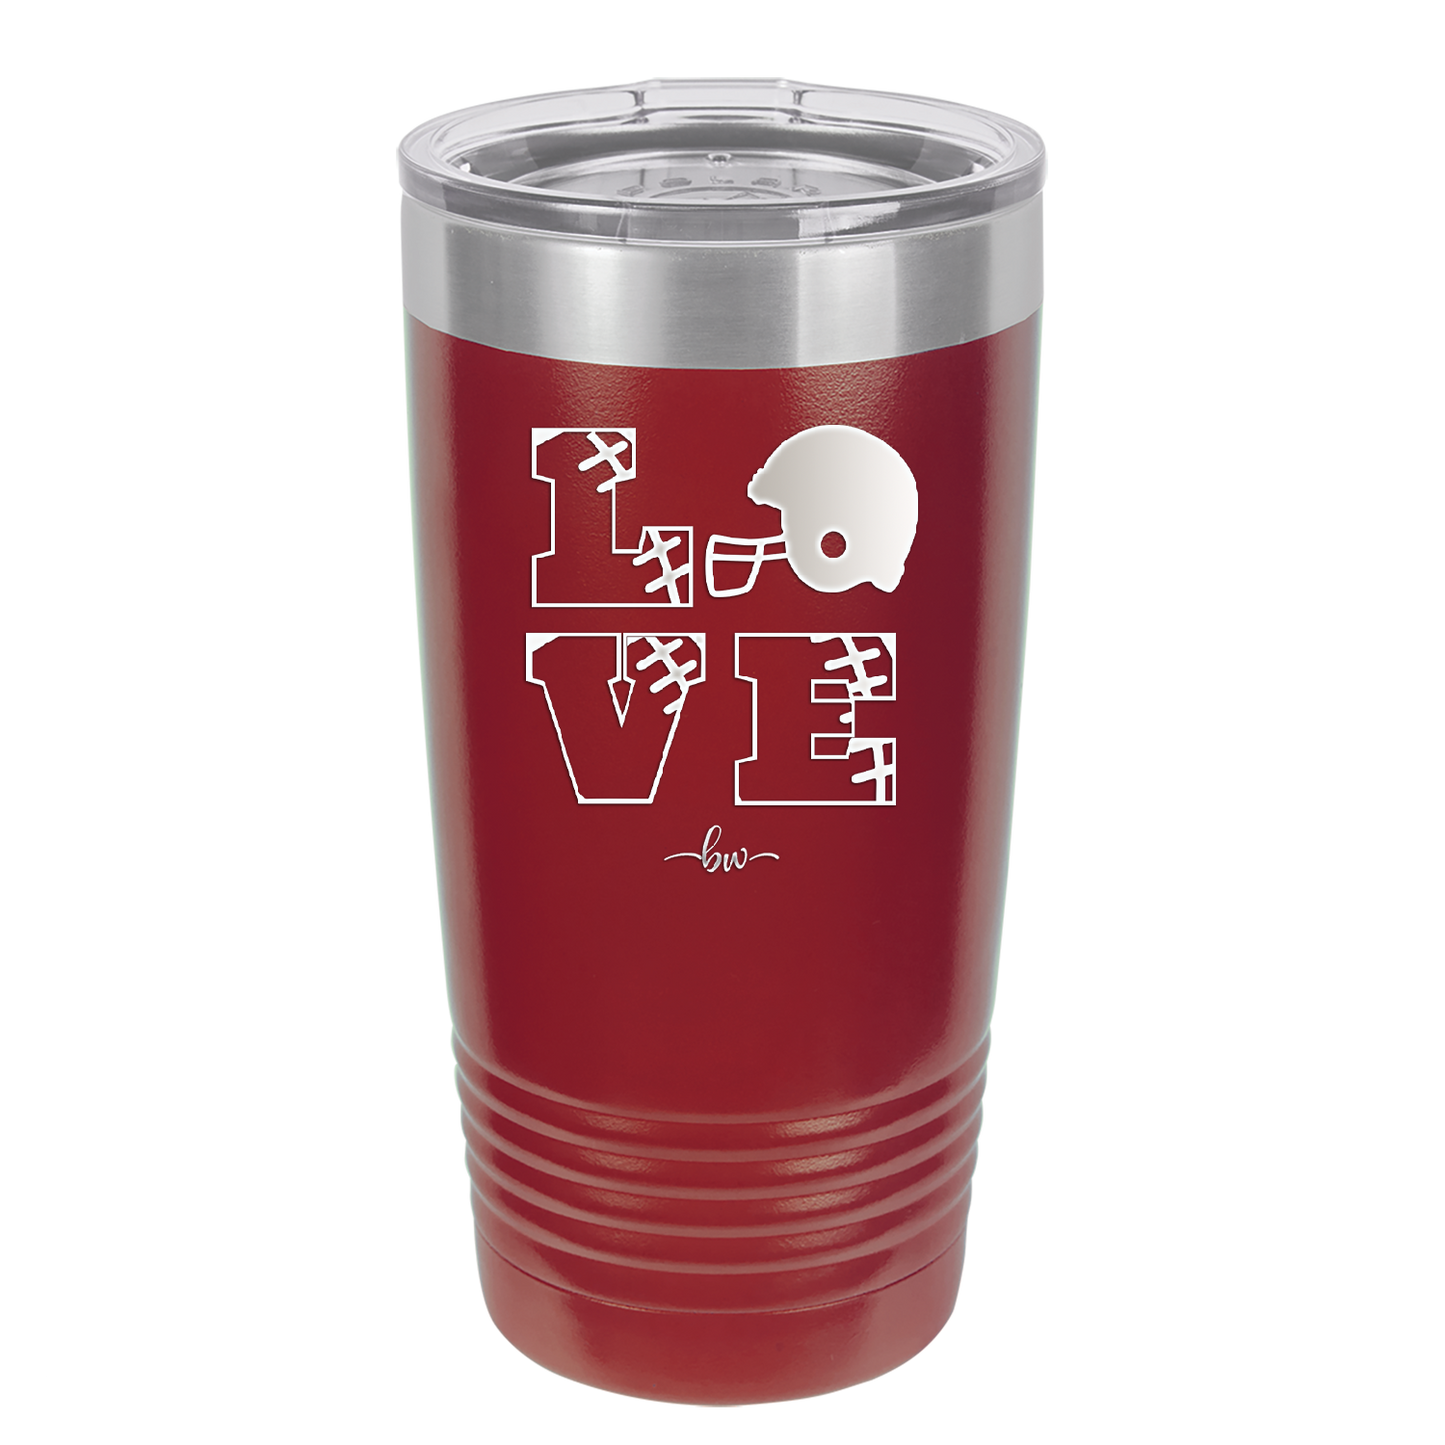 LOVE with Football and Helmet - Laser Engraved Stainless Steel Drinkware - 1889 -